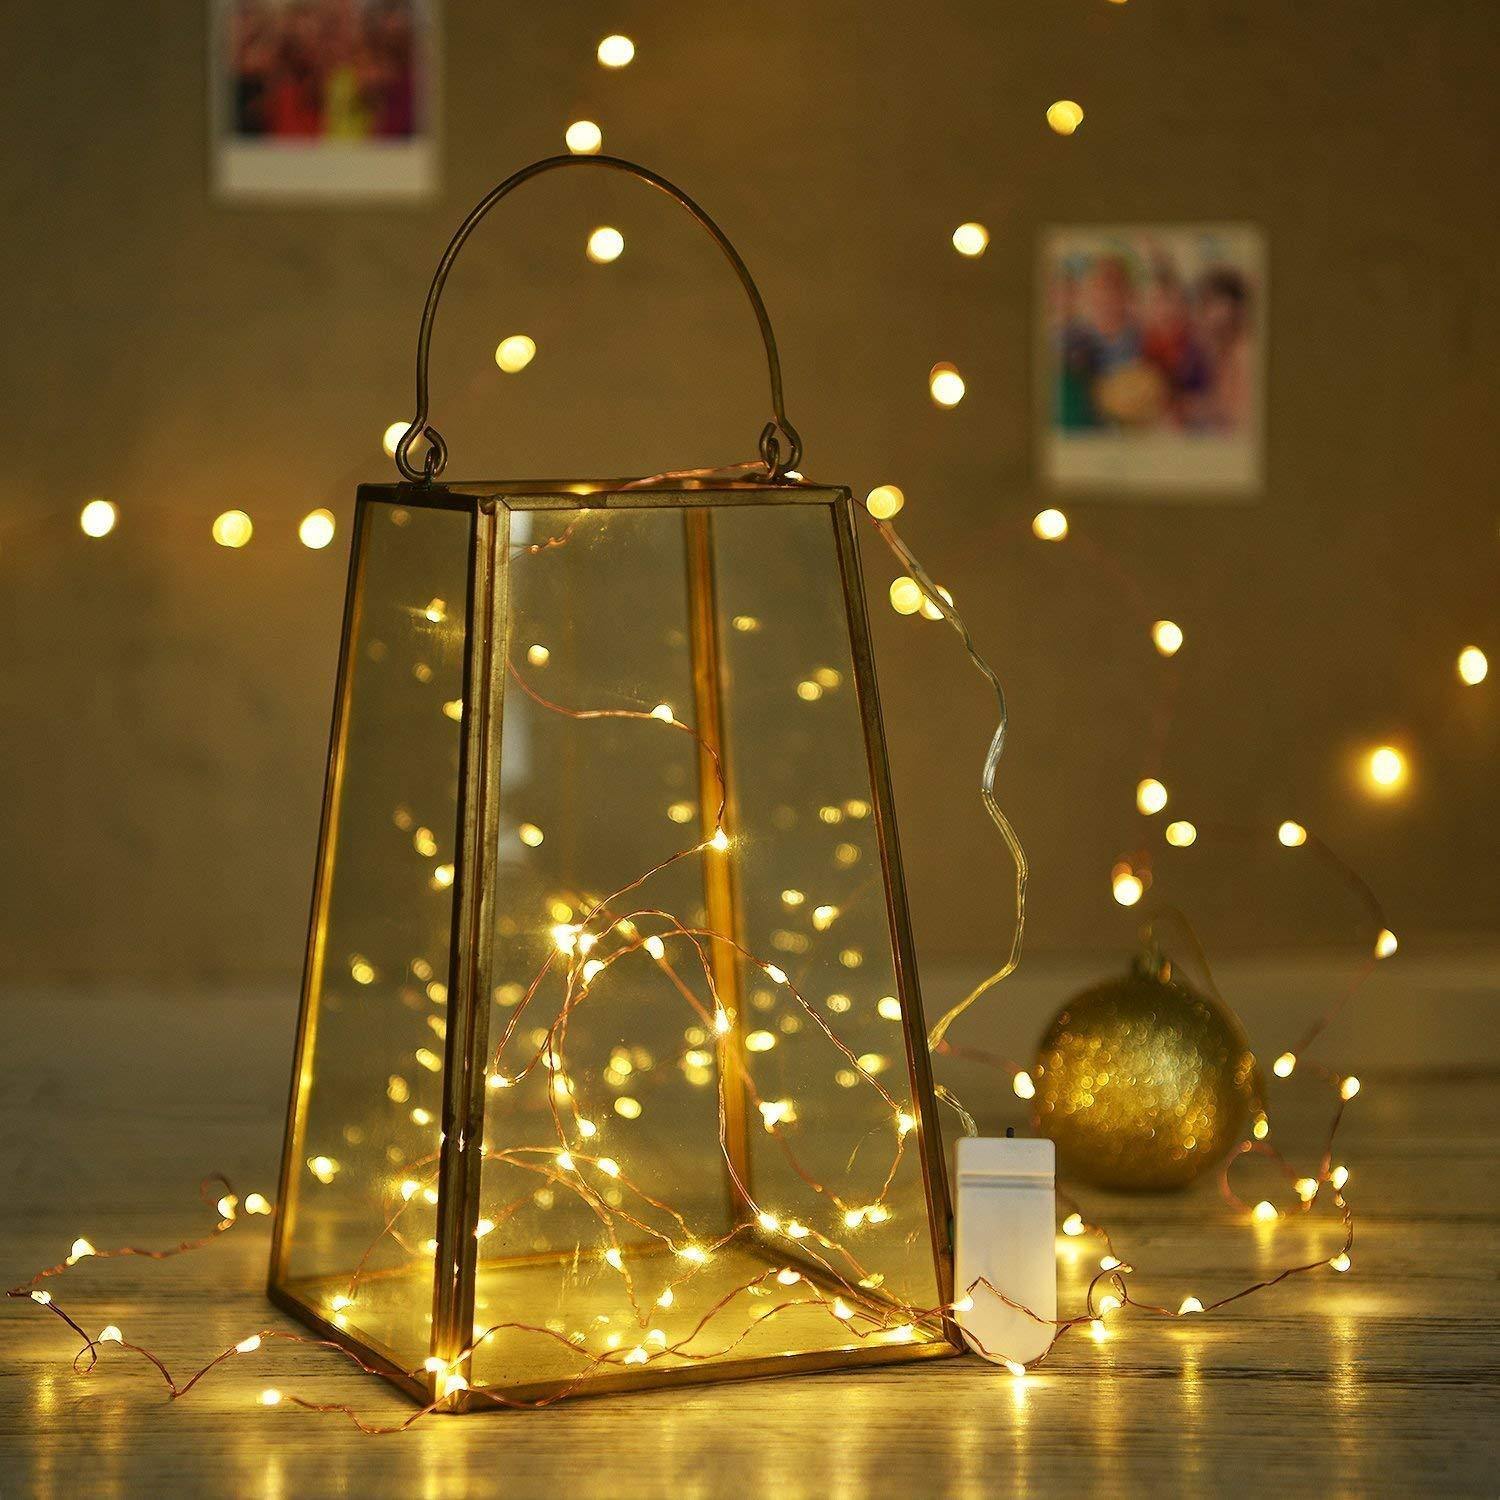 Buy XERGY Usb 50 Leds Waterproof Fairy String Lights For Decoration ,Starry  String Lights,2 M Usb Powered Copper Wire Lights,5 meters Online at Low  Prices in India 